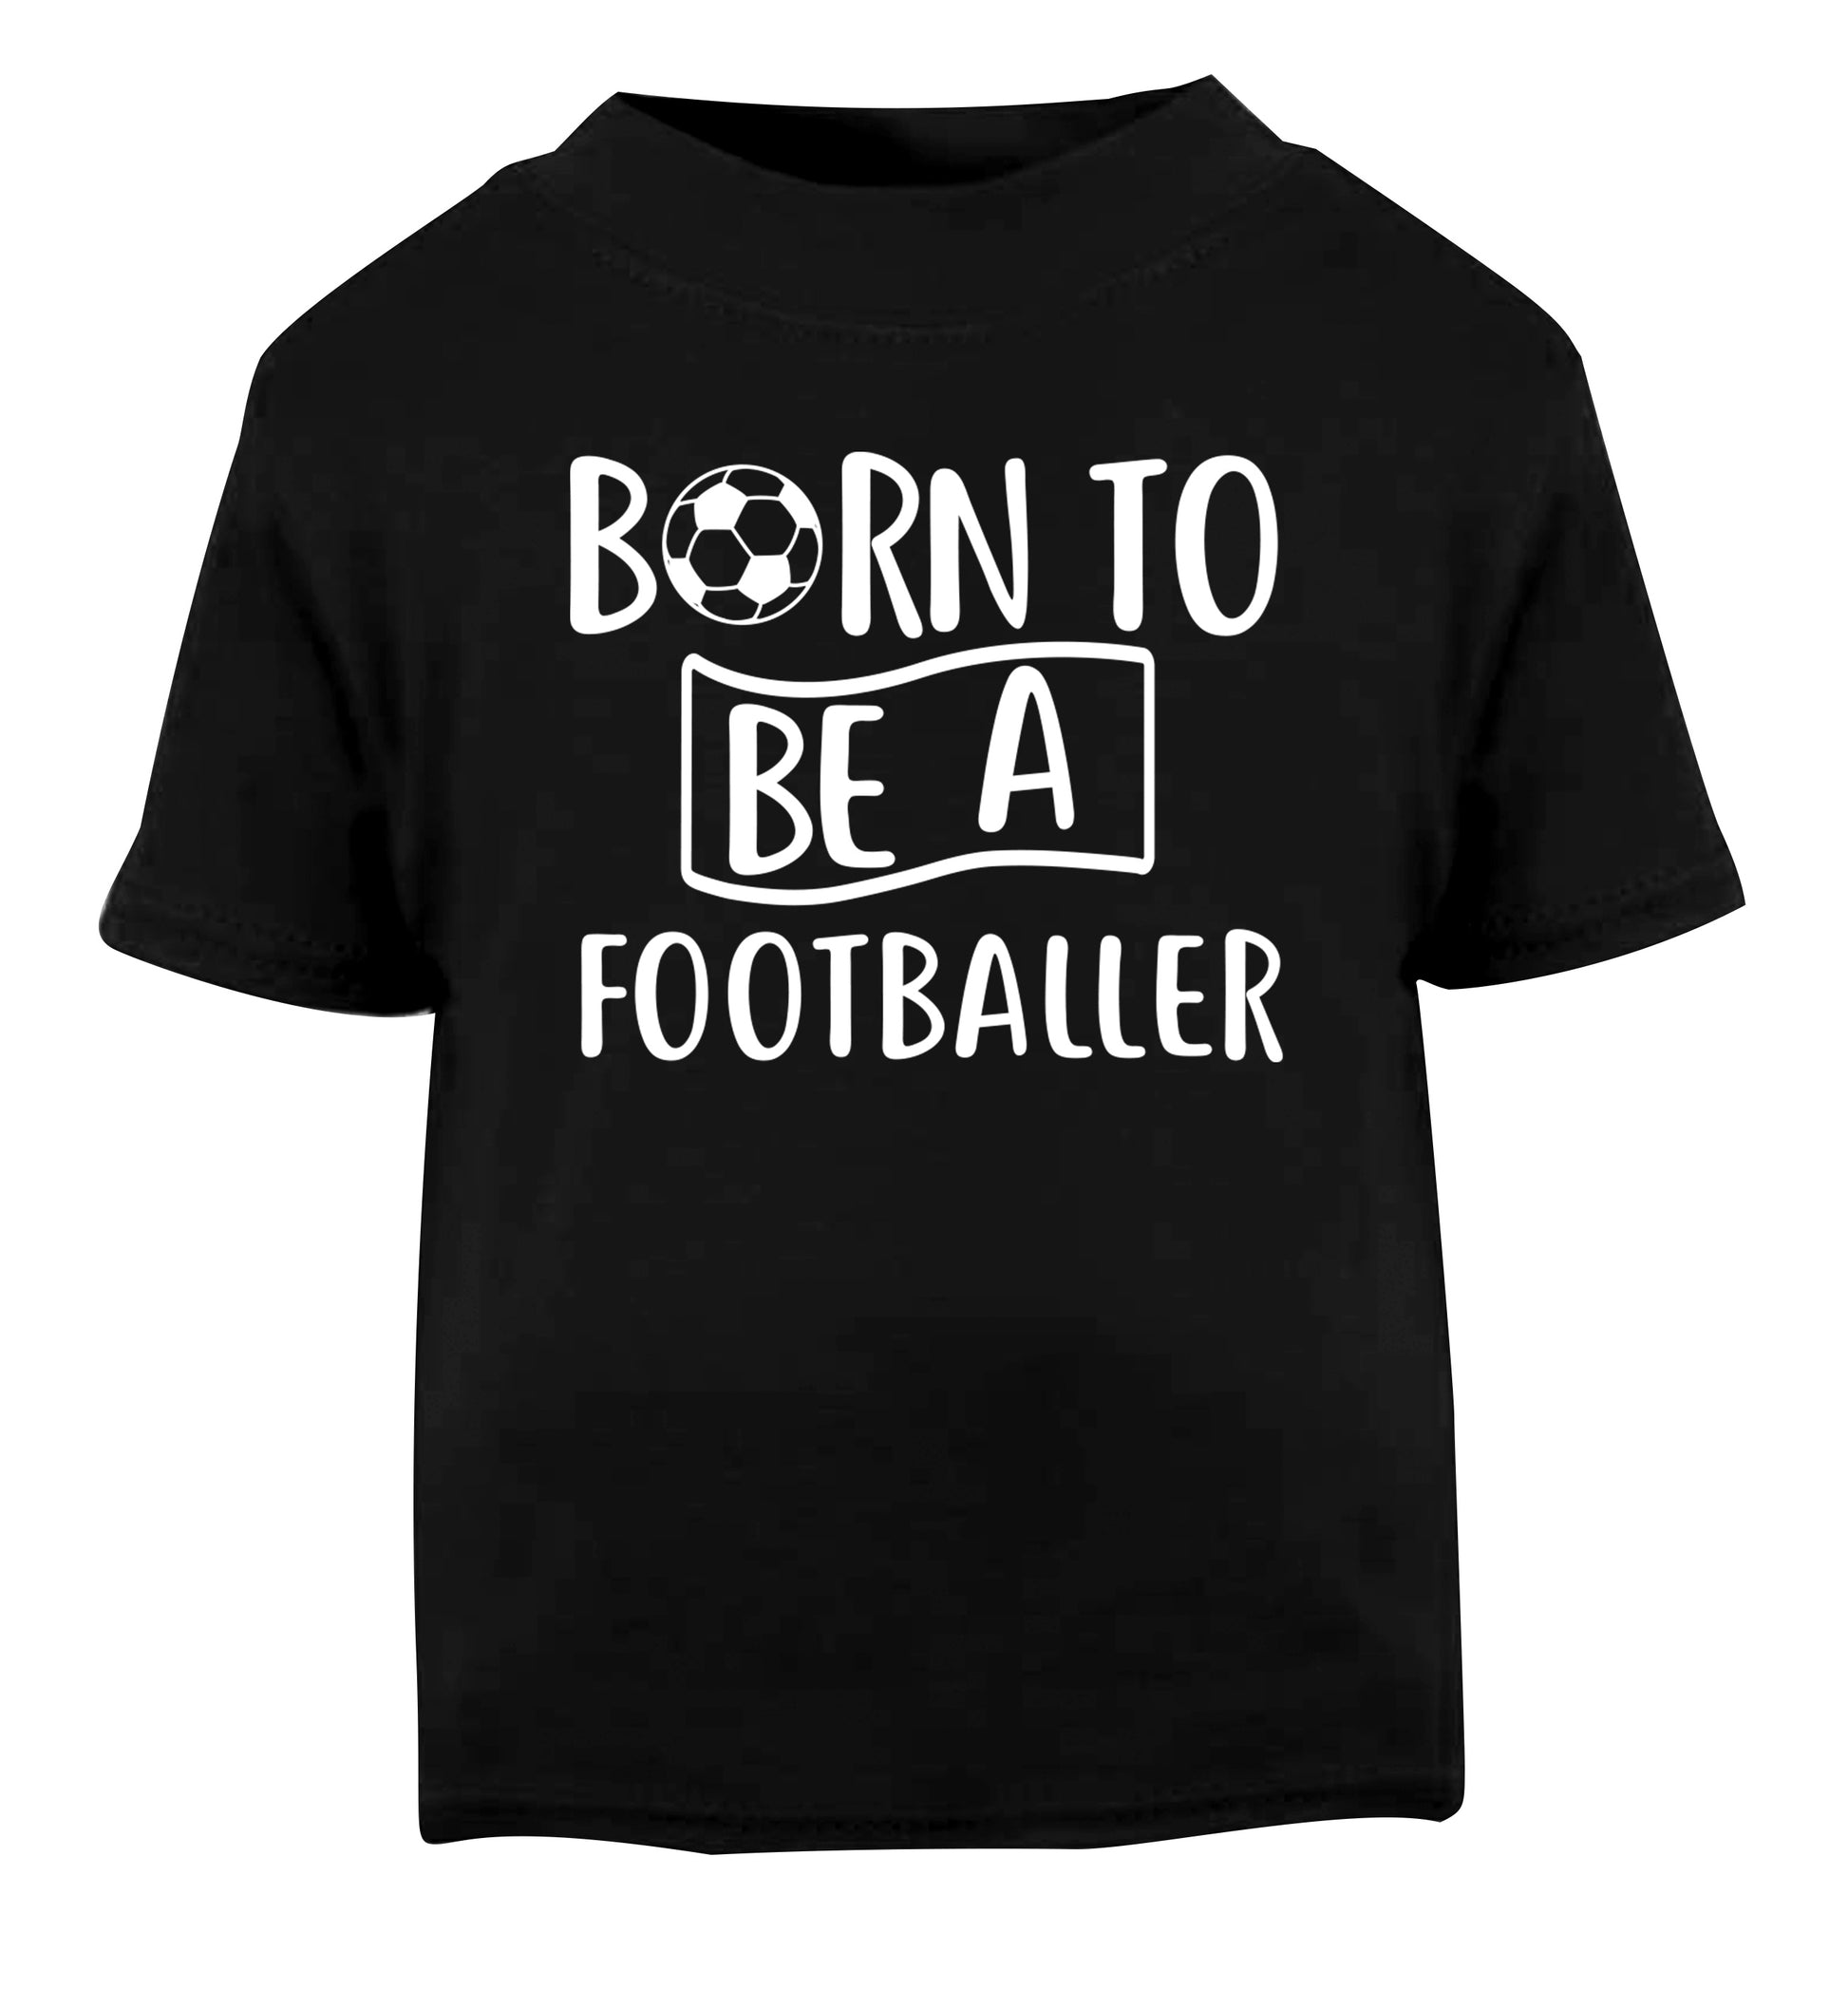 Born to be a footballer Black Baby Toddler Tshirt 2 years